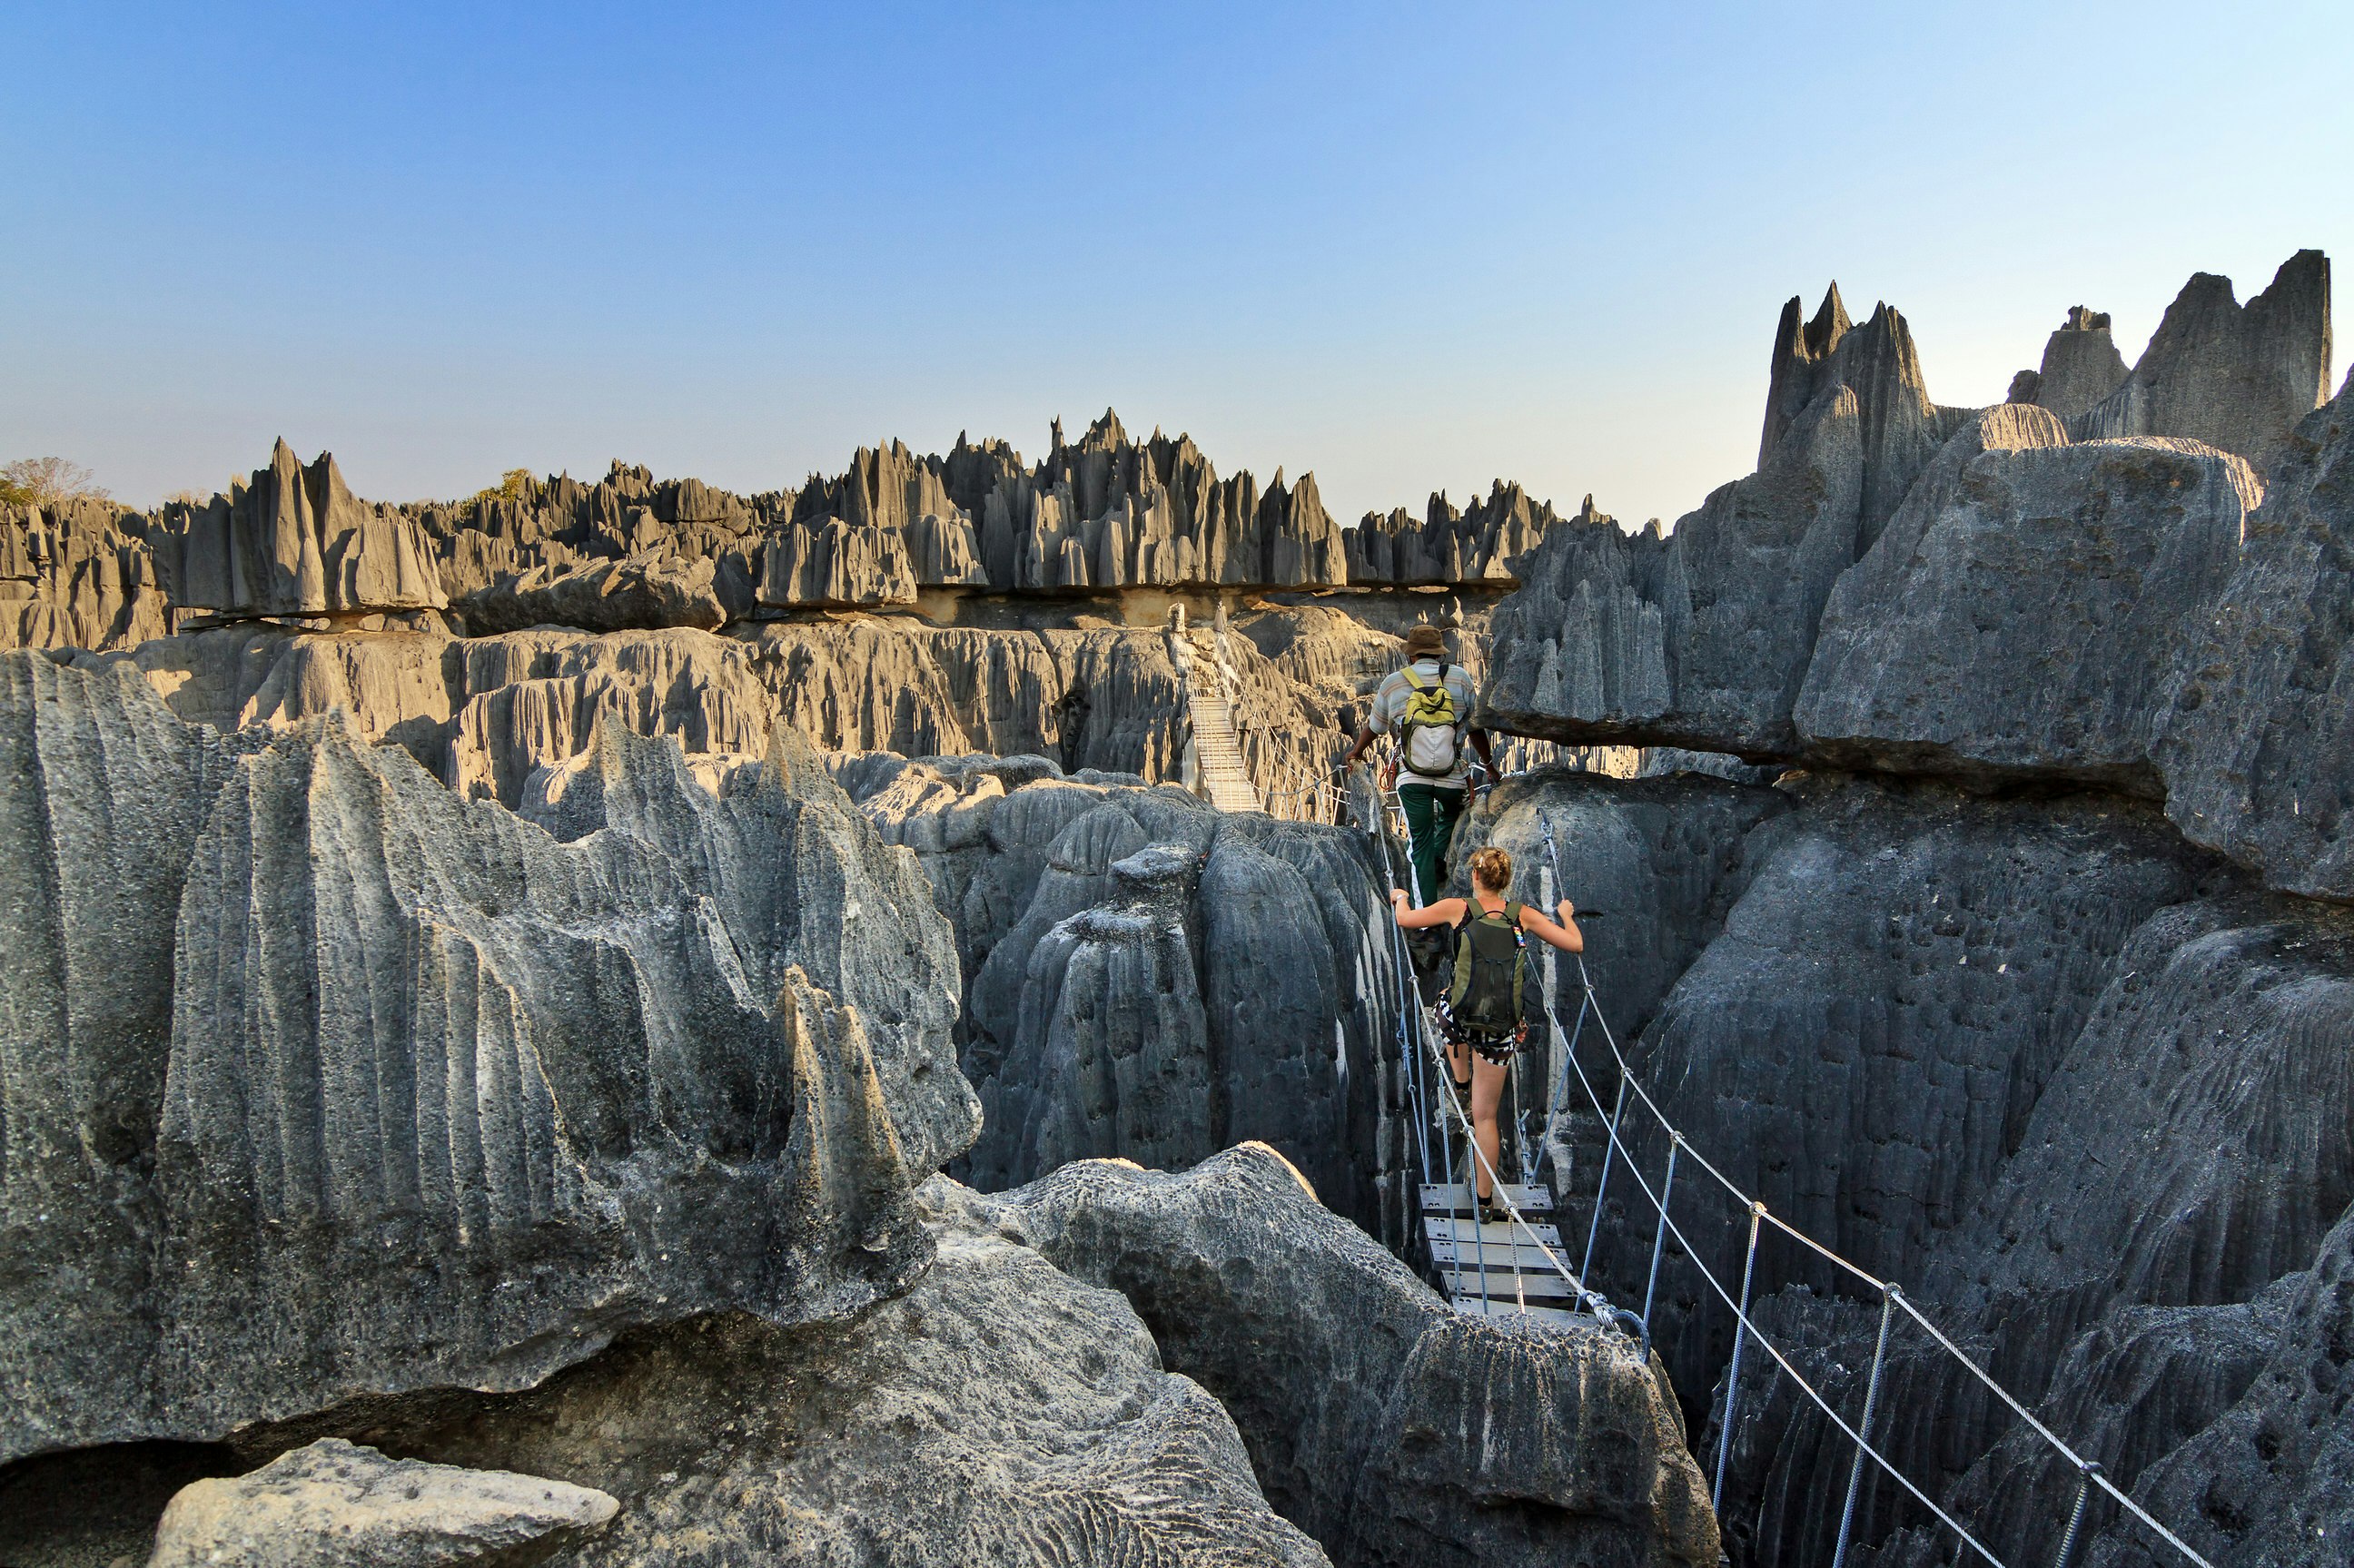 Two hikers make their way across a rope bridge that swings between the razor-like pinnacles atop the tsingy rock formations.